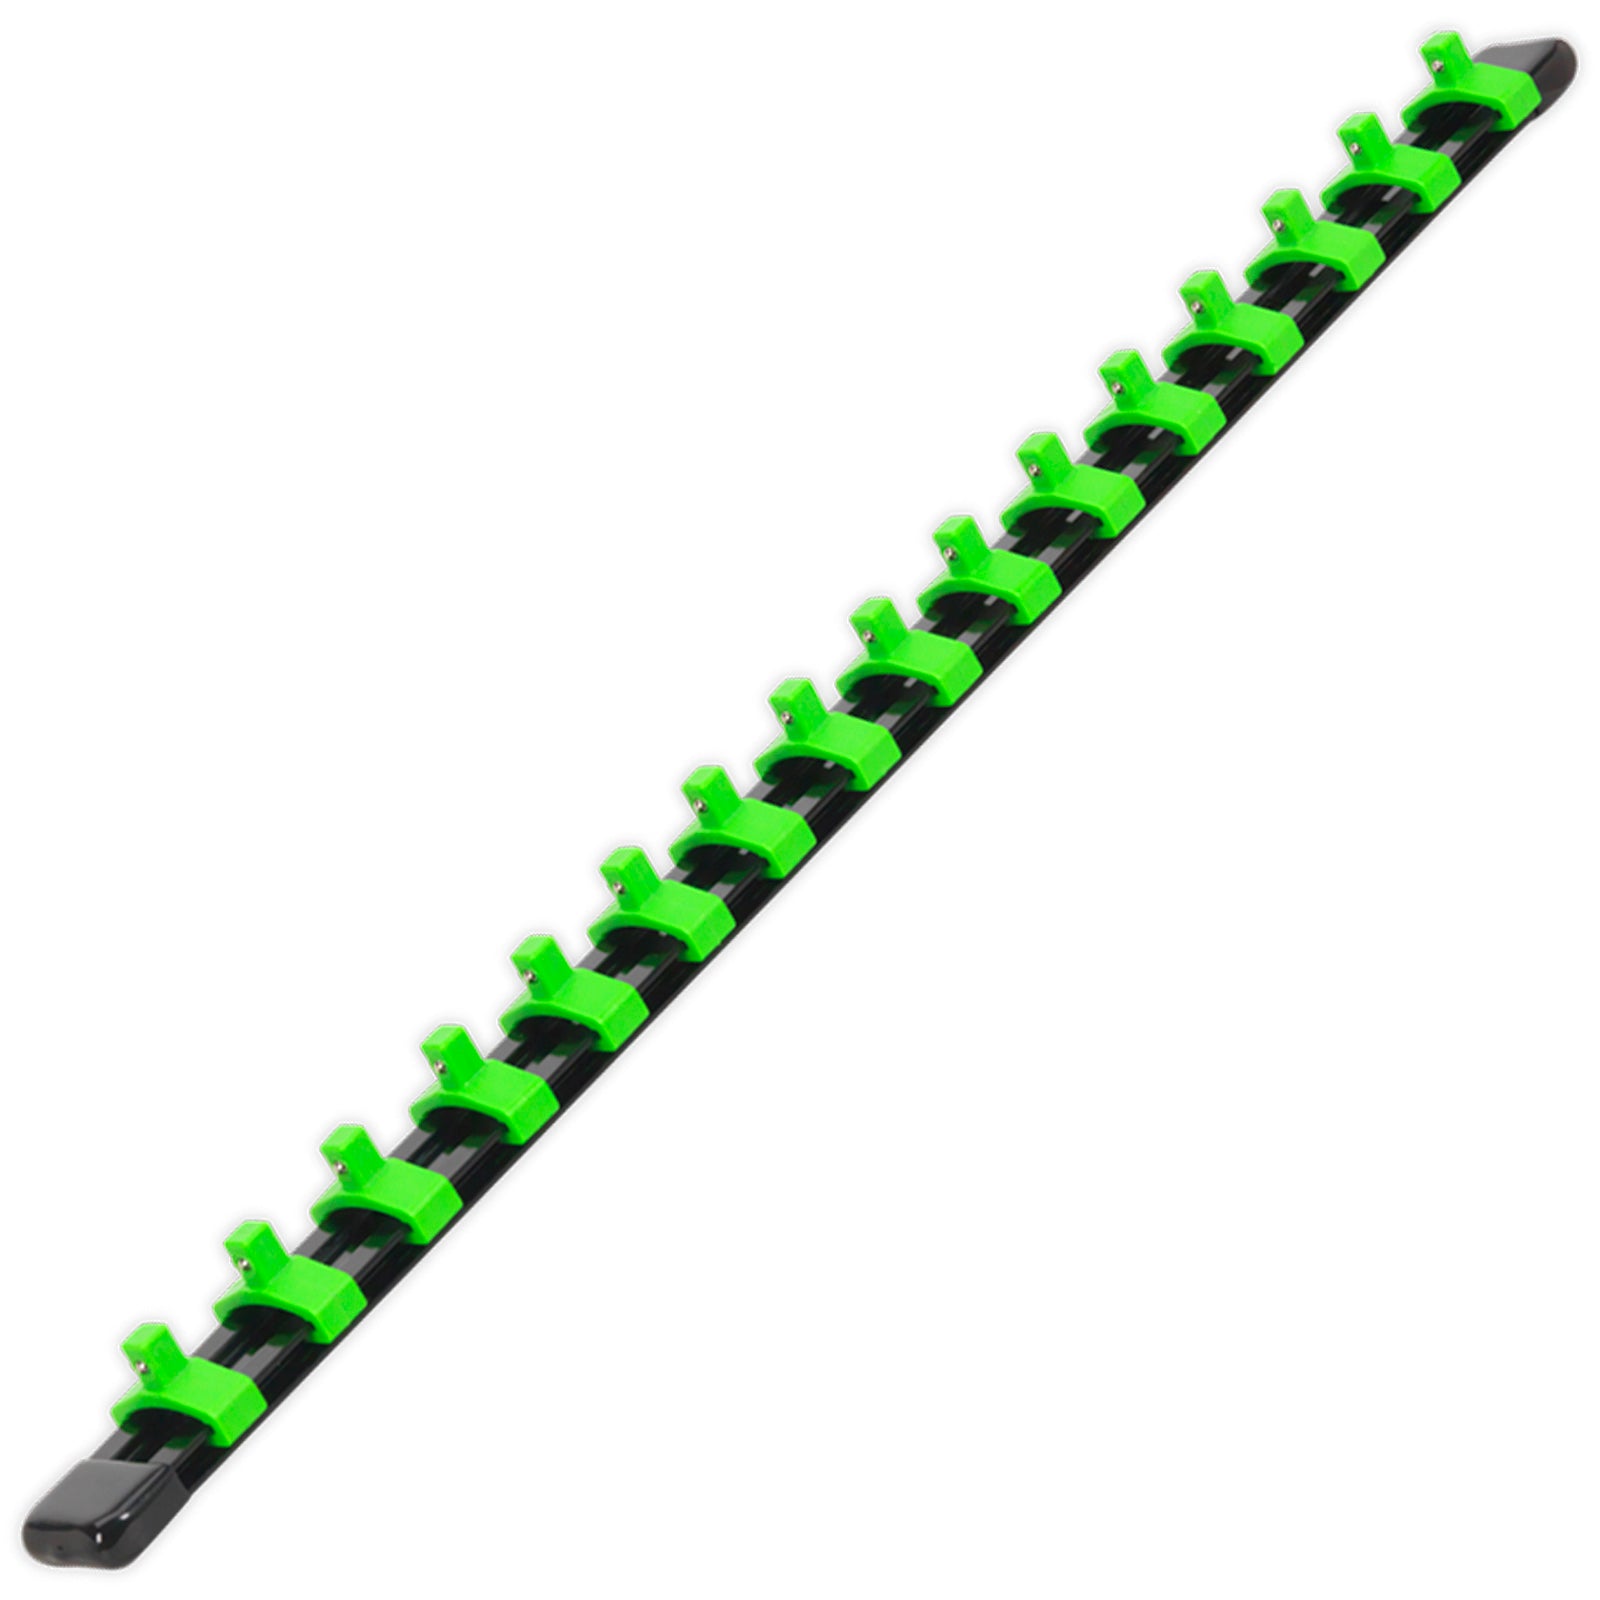 Sealey Premier High Visibilty Green Socket Retaining Rail With 16 Clips